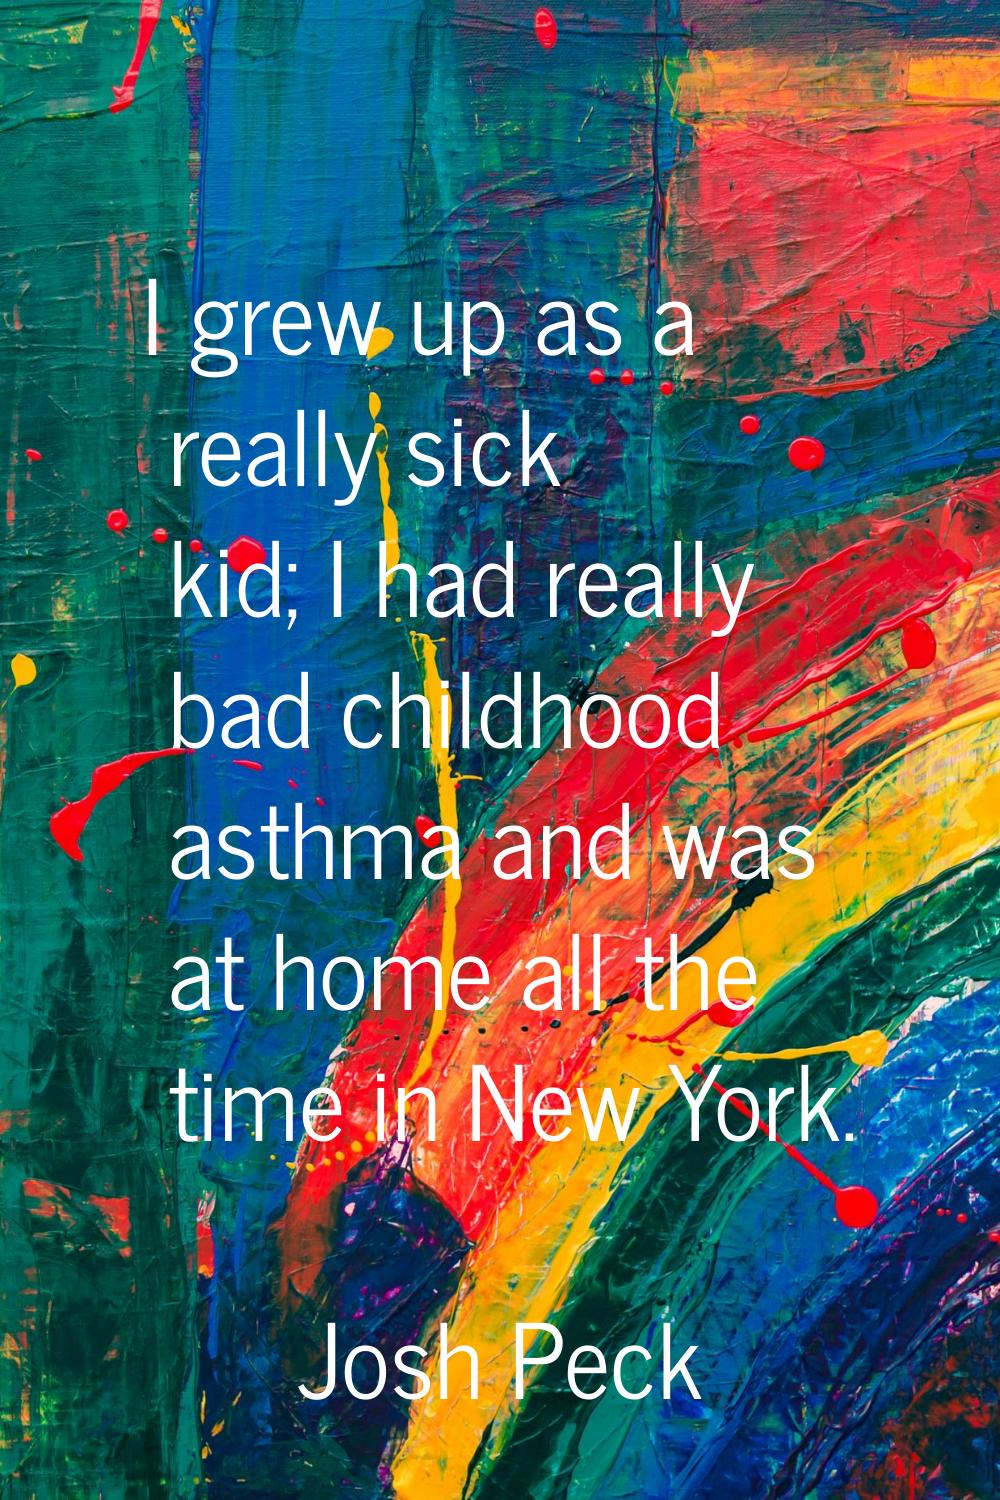 I grew up as a really sick kid; I had really bad childhood asthma and was at home all the time in N